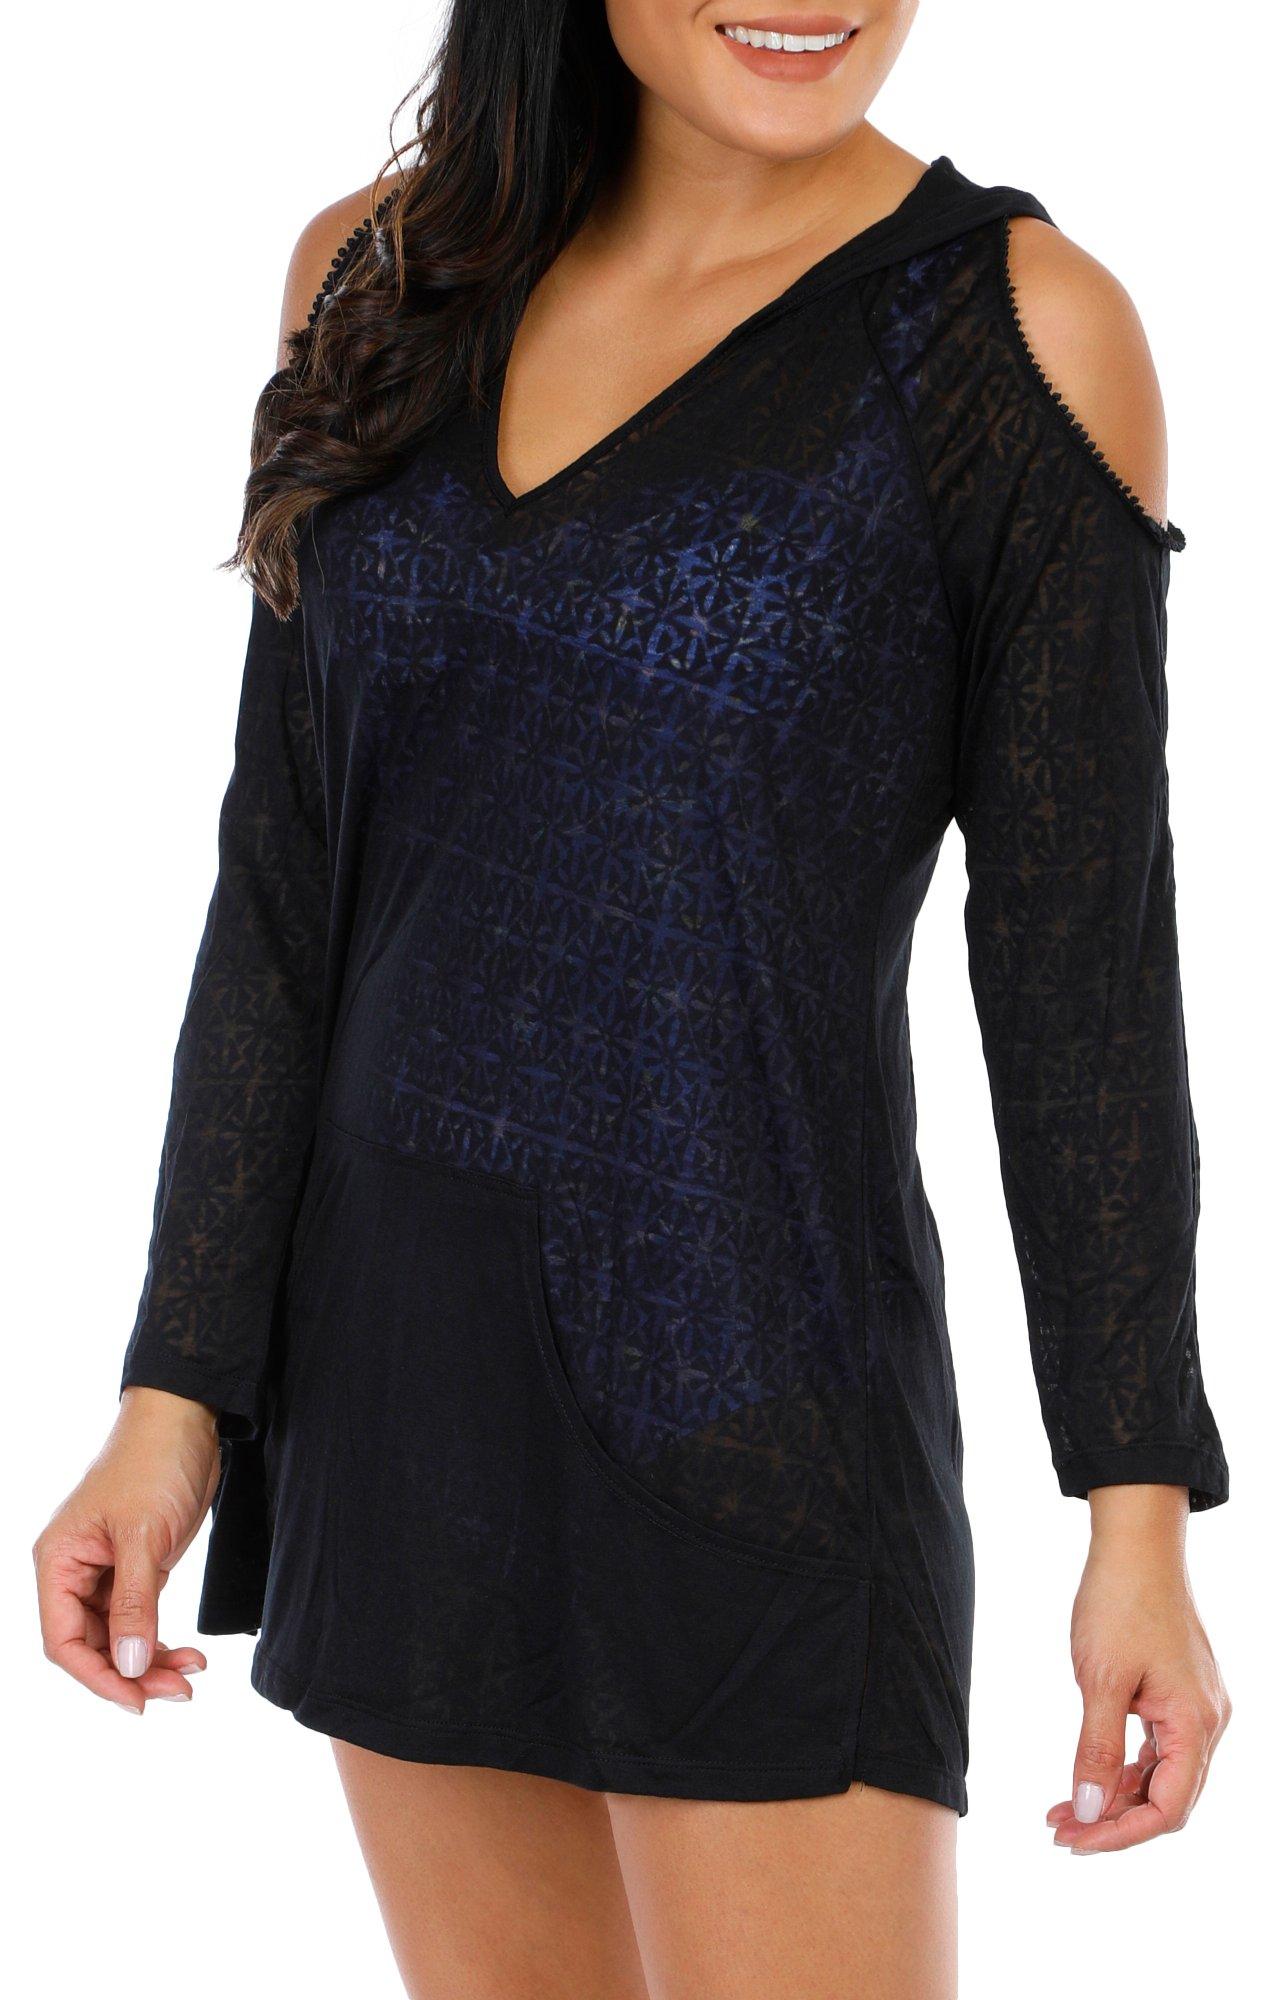 Women's Solid Hooded Swim Coverup